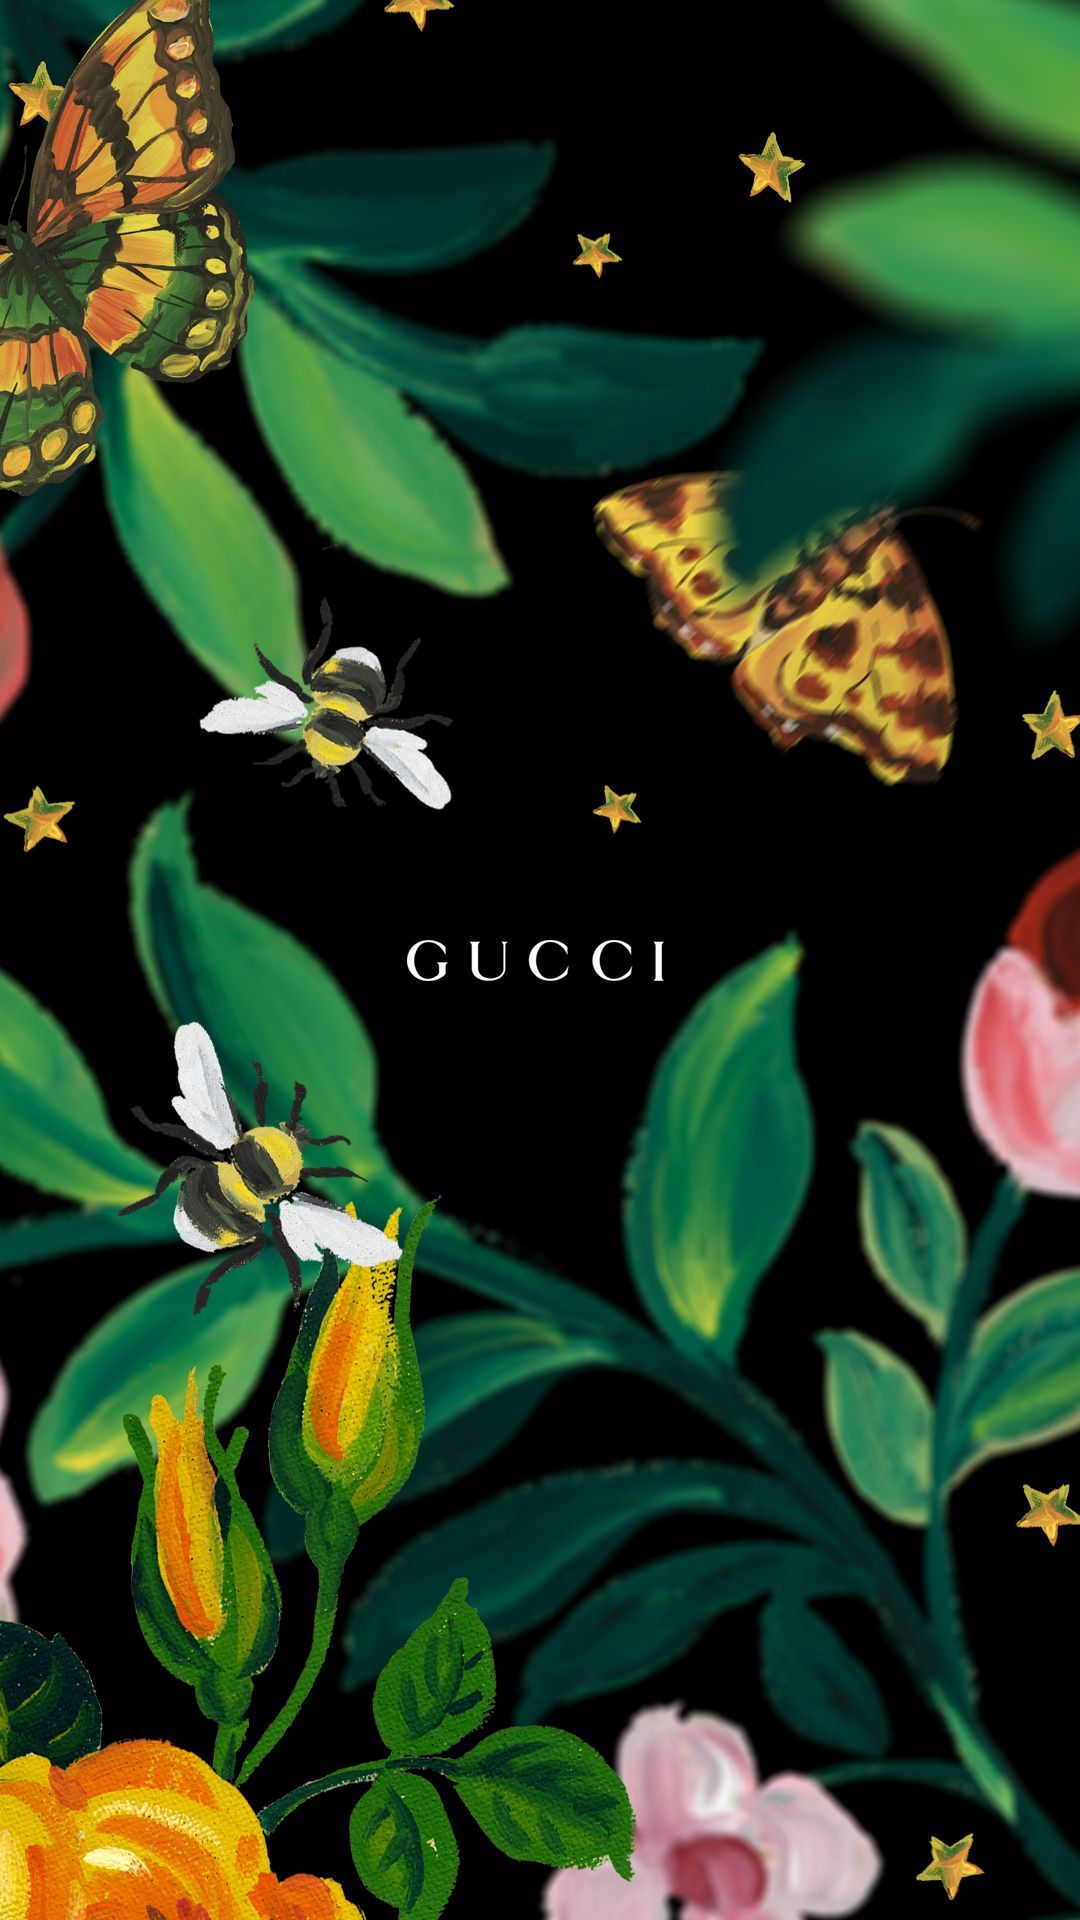 Gucci Wallpapers on WallpaperDog